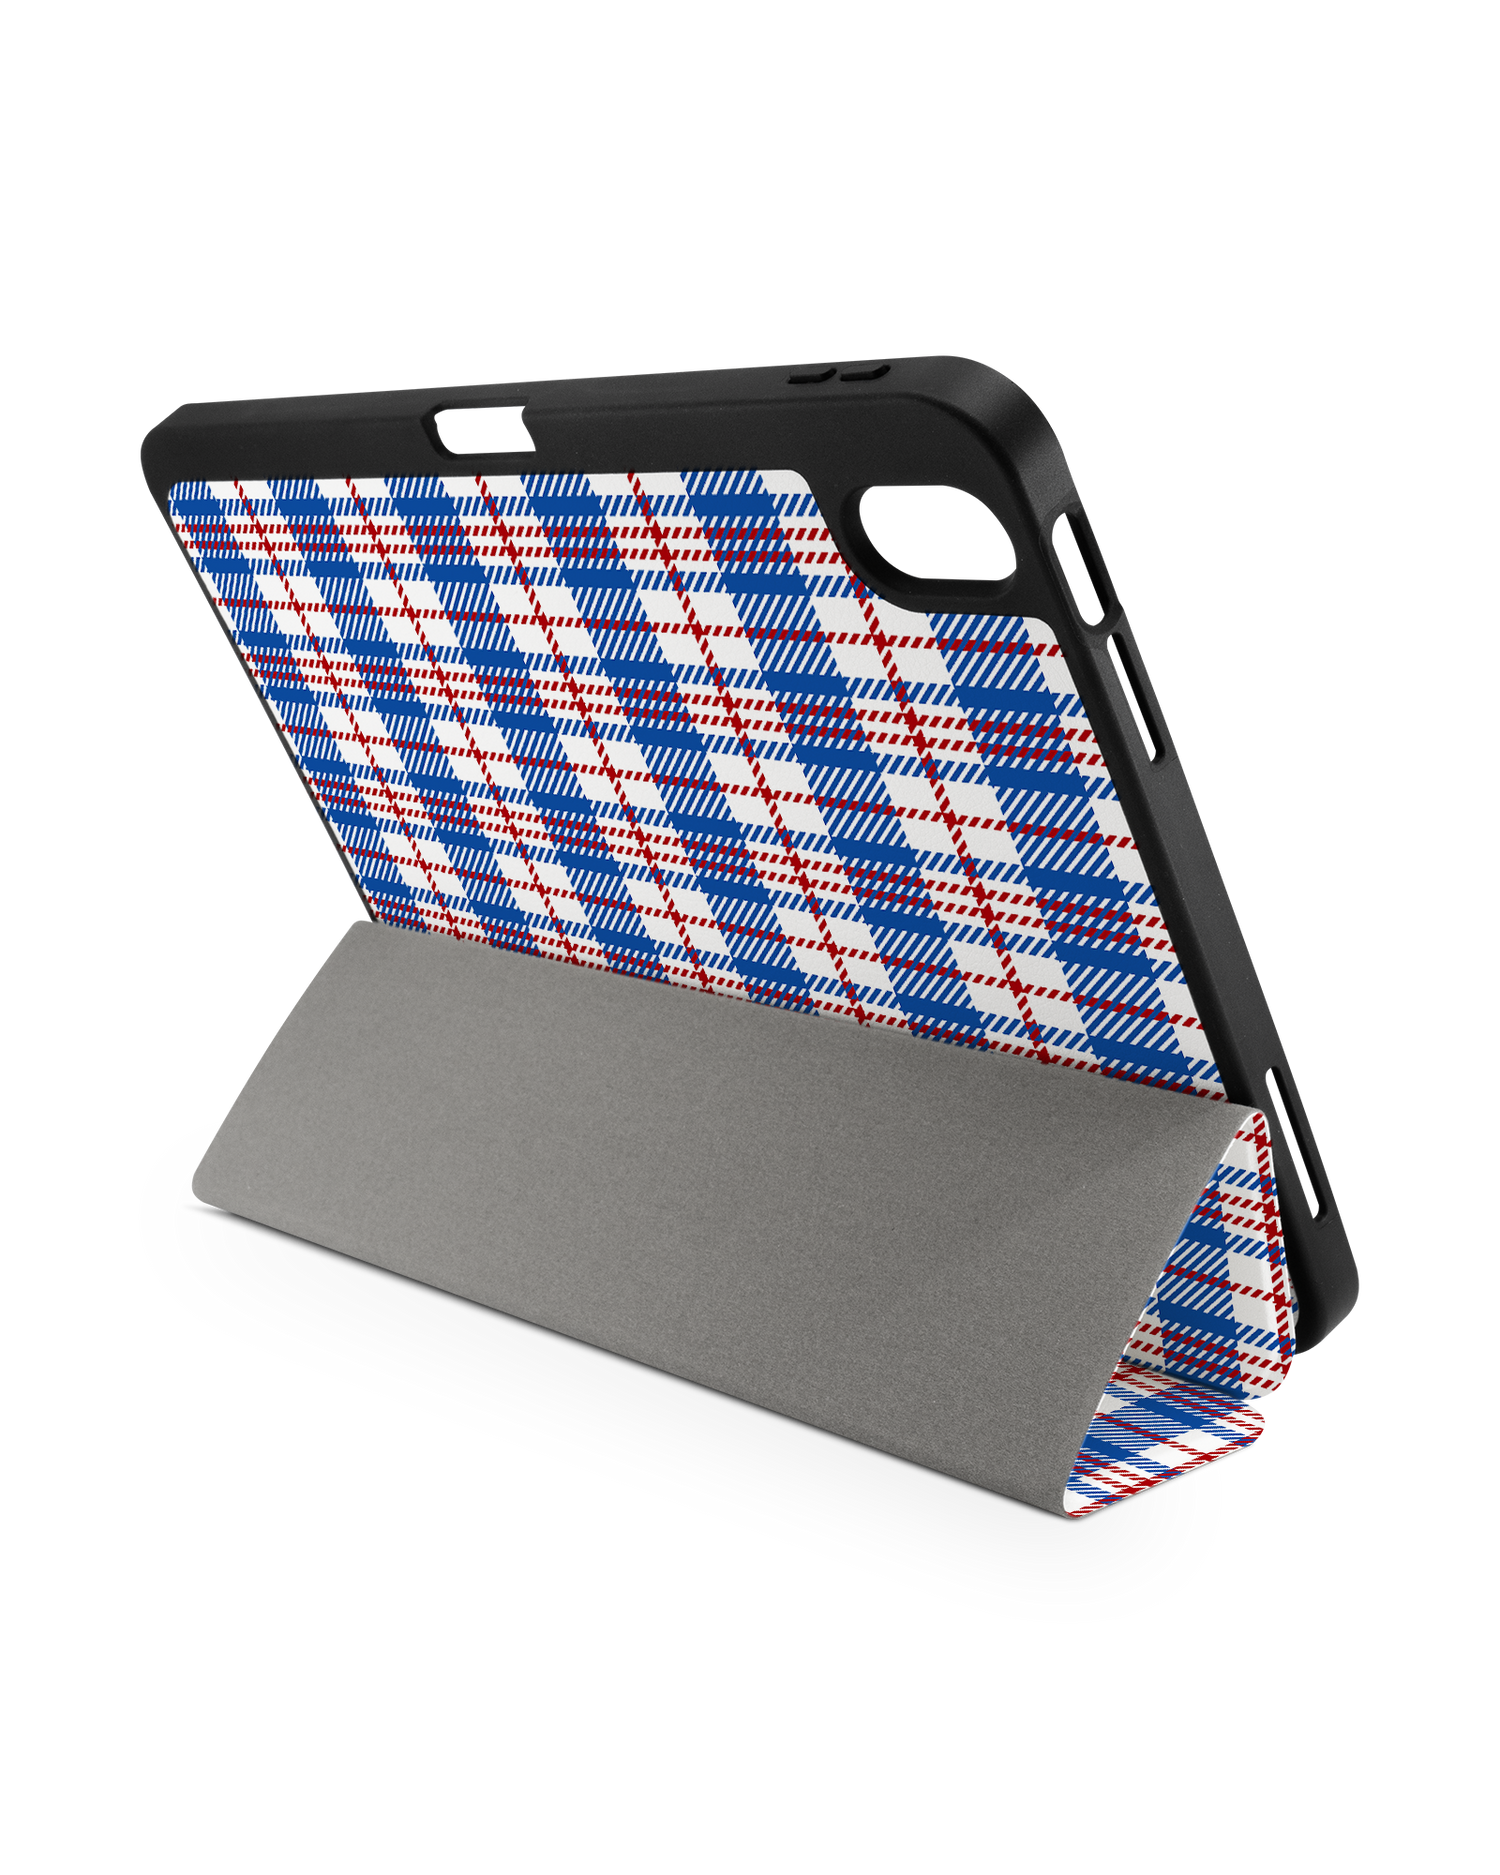 Plaid Market Bag iPad Case with Pencil Holder for Apple iPad (10th Generation): Set up in landscape format (back view)